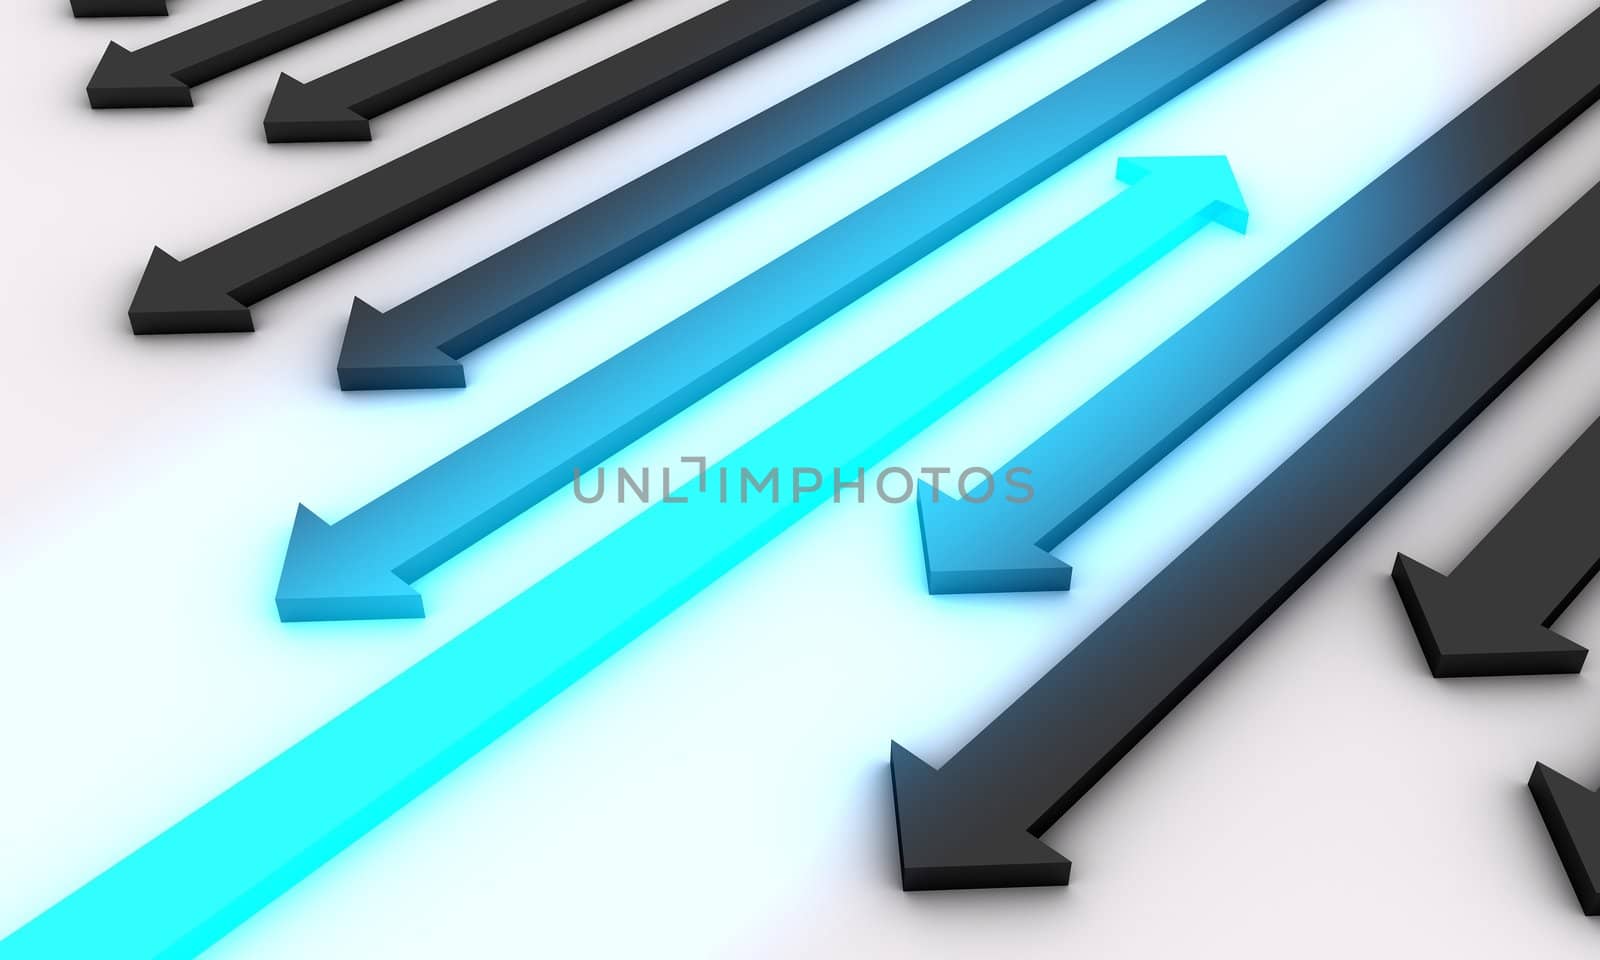 Concept of right direction leader. Idea is portrayed by black arrows going backwards (in wrong direction) whereas only singe arrow glowing in light blue color heads forward (in the right direction) which makes it direction leader. Scene rendered on white background.